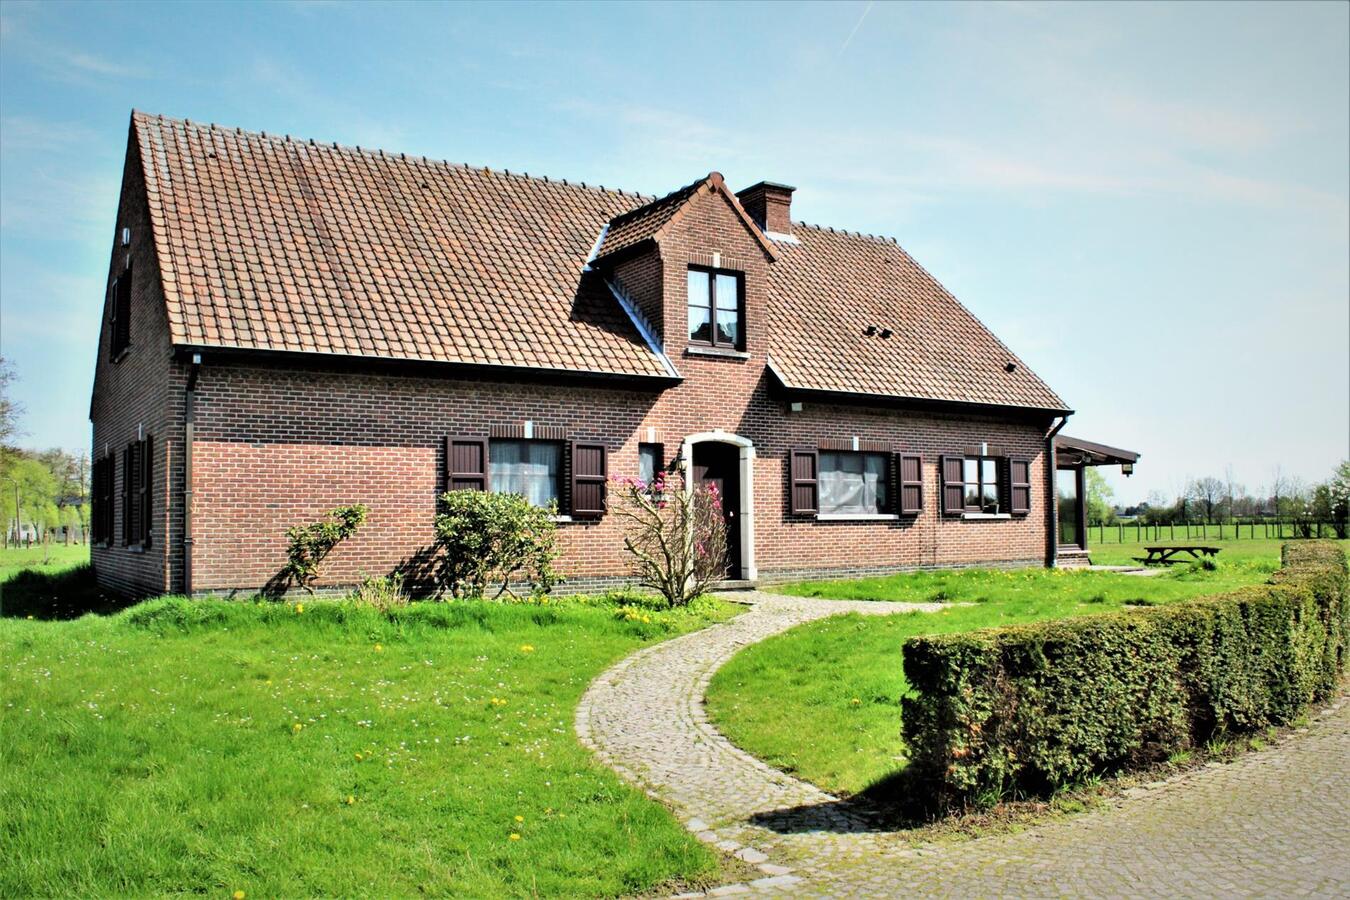 Property sold in Herent